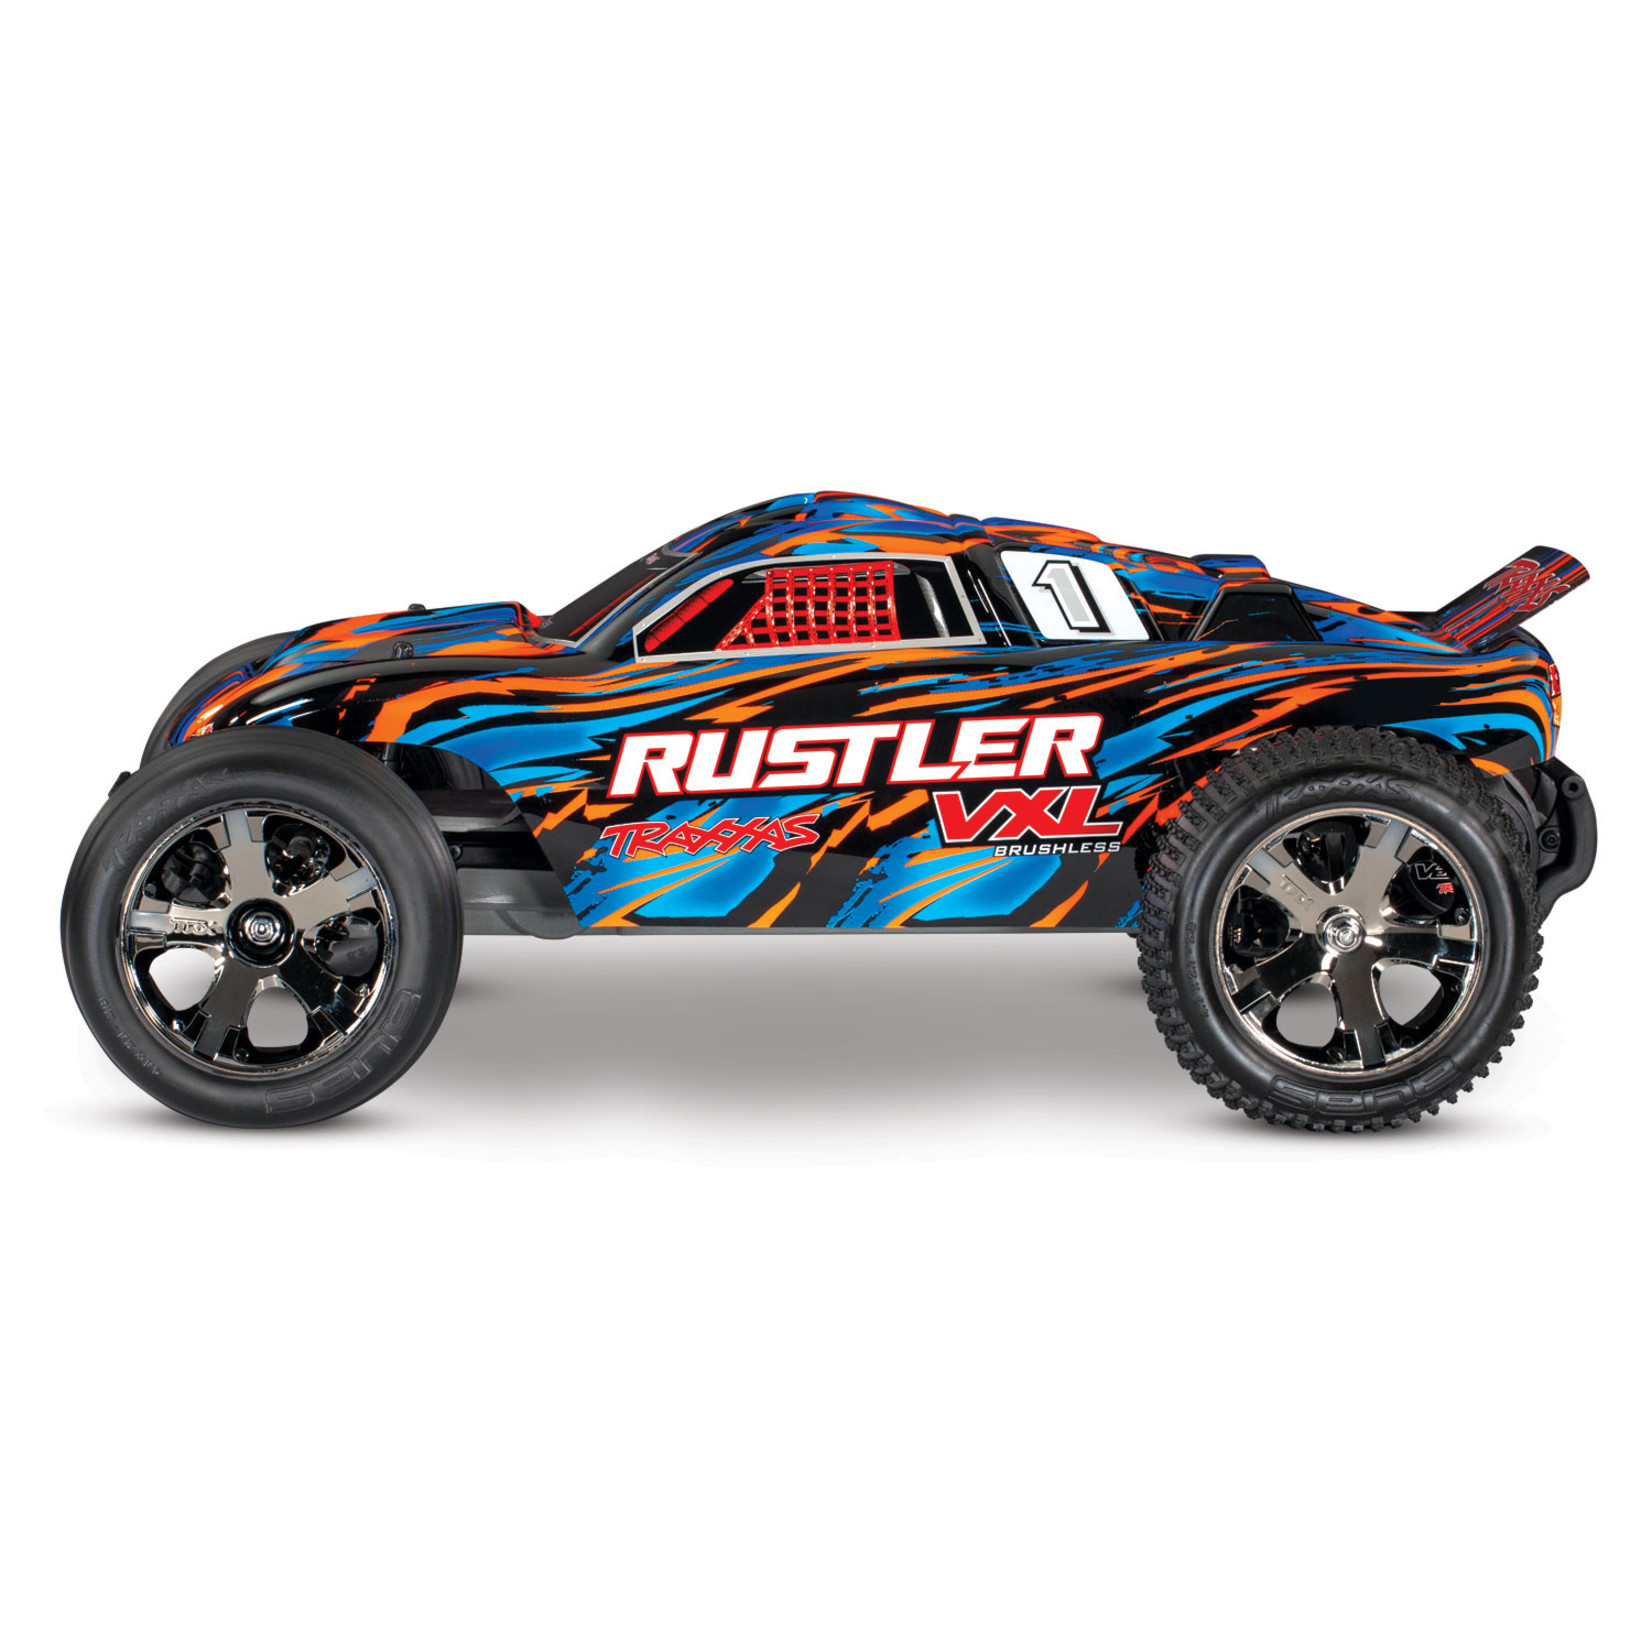 Traxxas 67076-4-ORNG Rustler® 4X4 VXL:  1/10 Scale Stadium Truck with TQi™ Traxxas Link™ Enabled 2.4GHz Radio System & Traxxas Stability Management (TSM)®